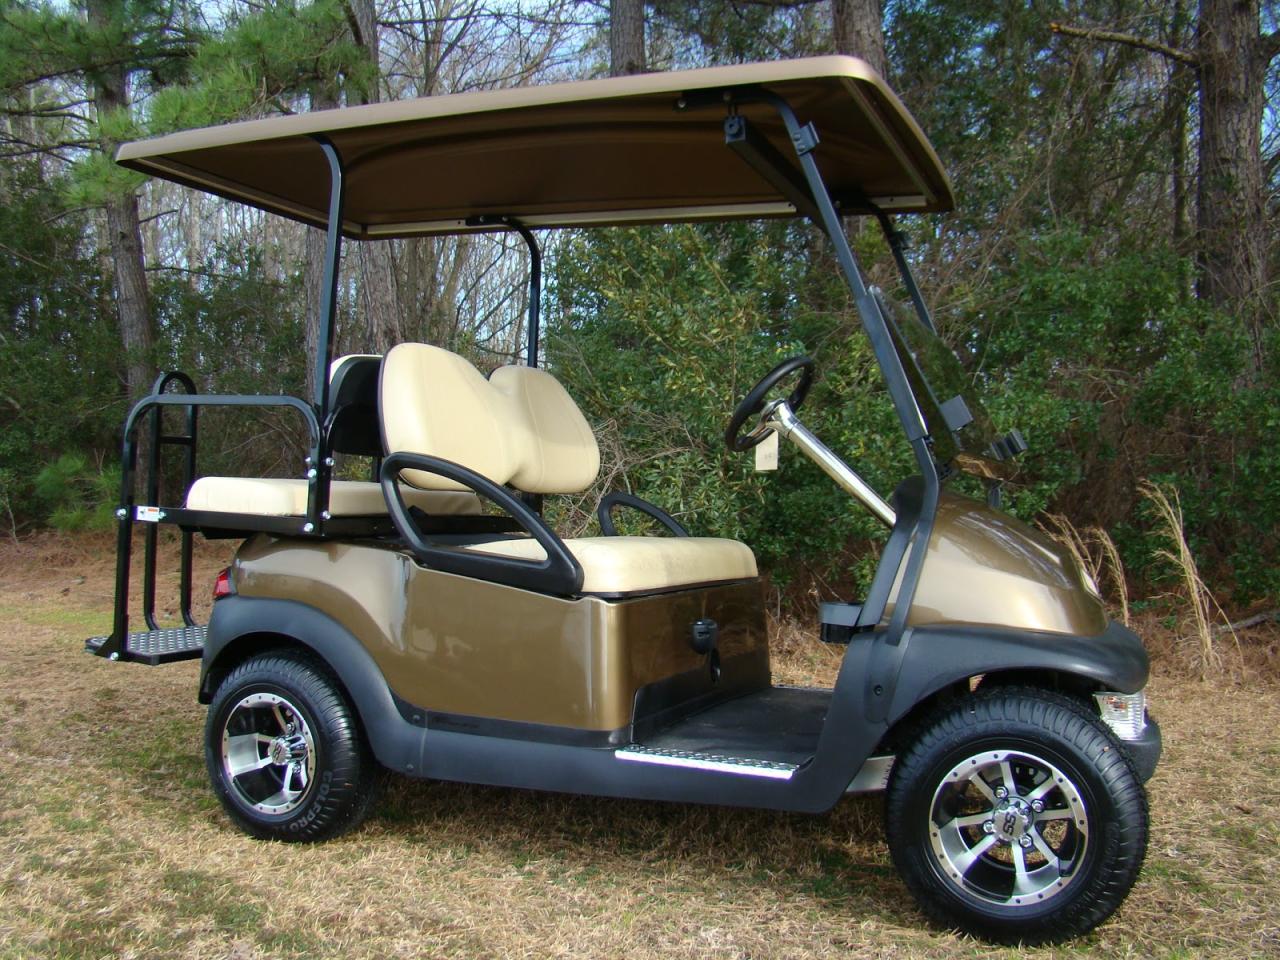 Used Golf Carts for Sale by Owner in Louisa, Iowa: Find Your Perfect Ride Today!